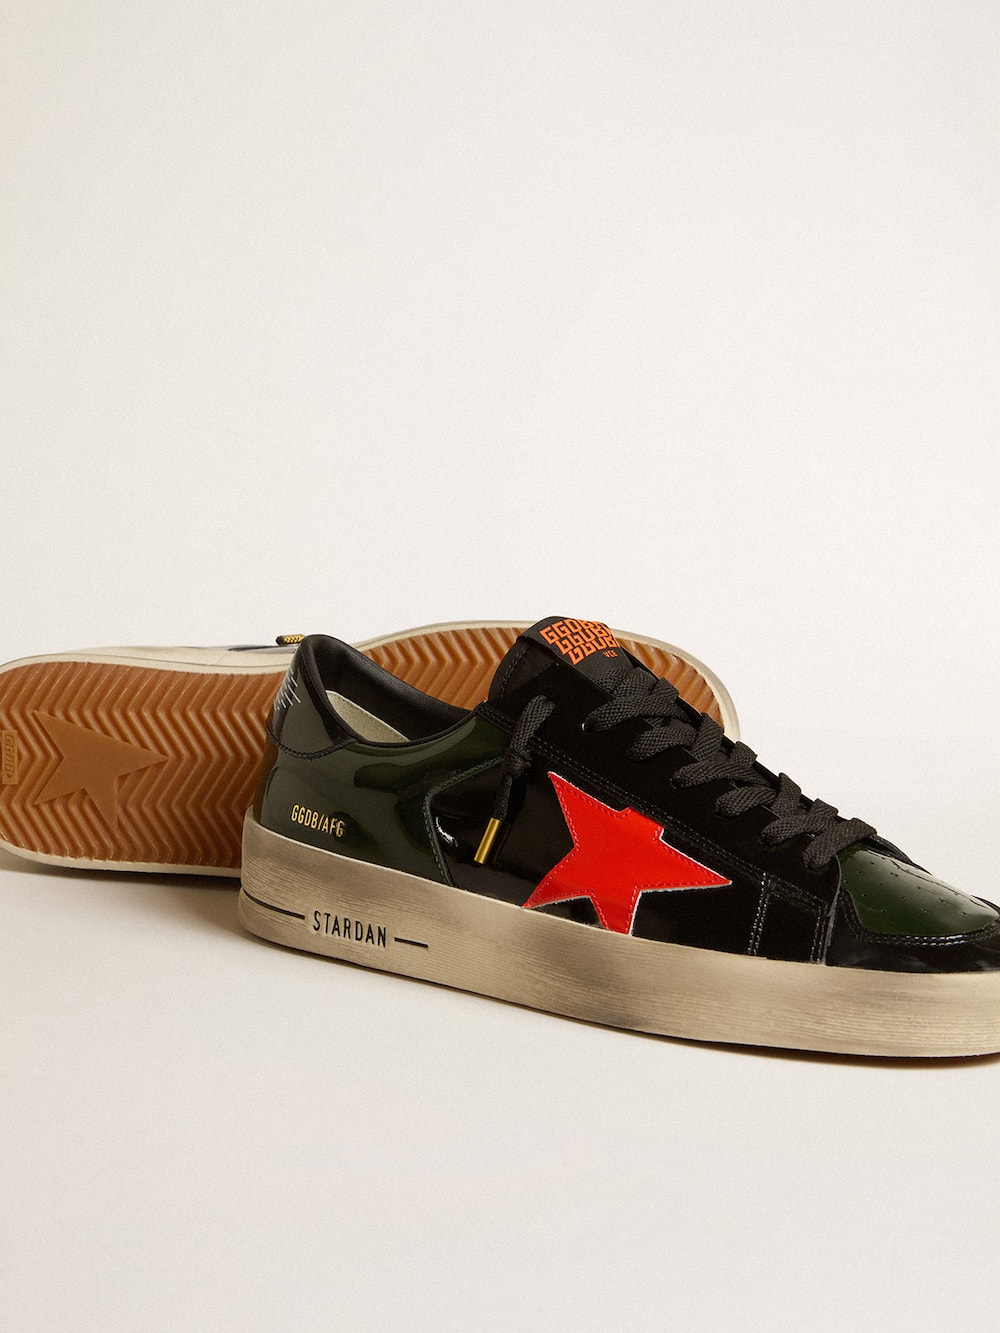 Golden Goose - Men's Stardan LAB in black and green patent leather with orange star in 